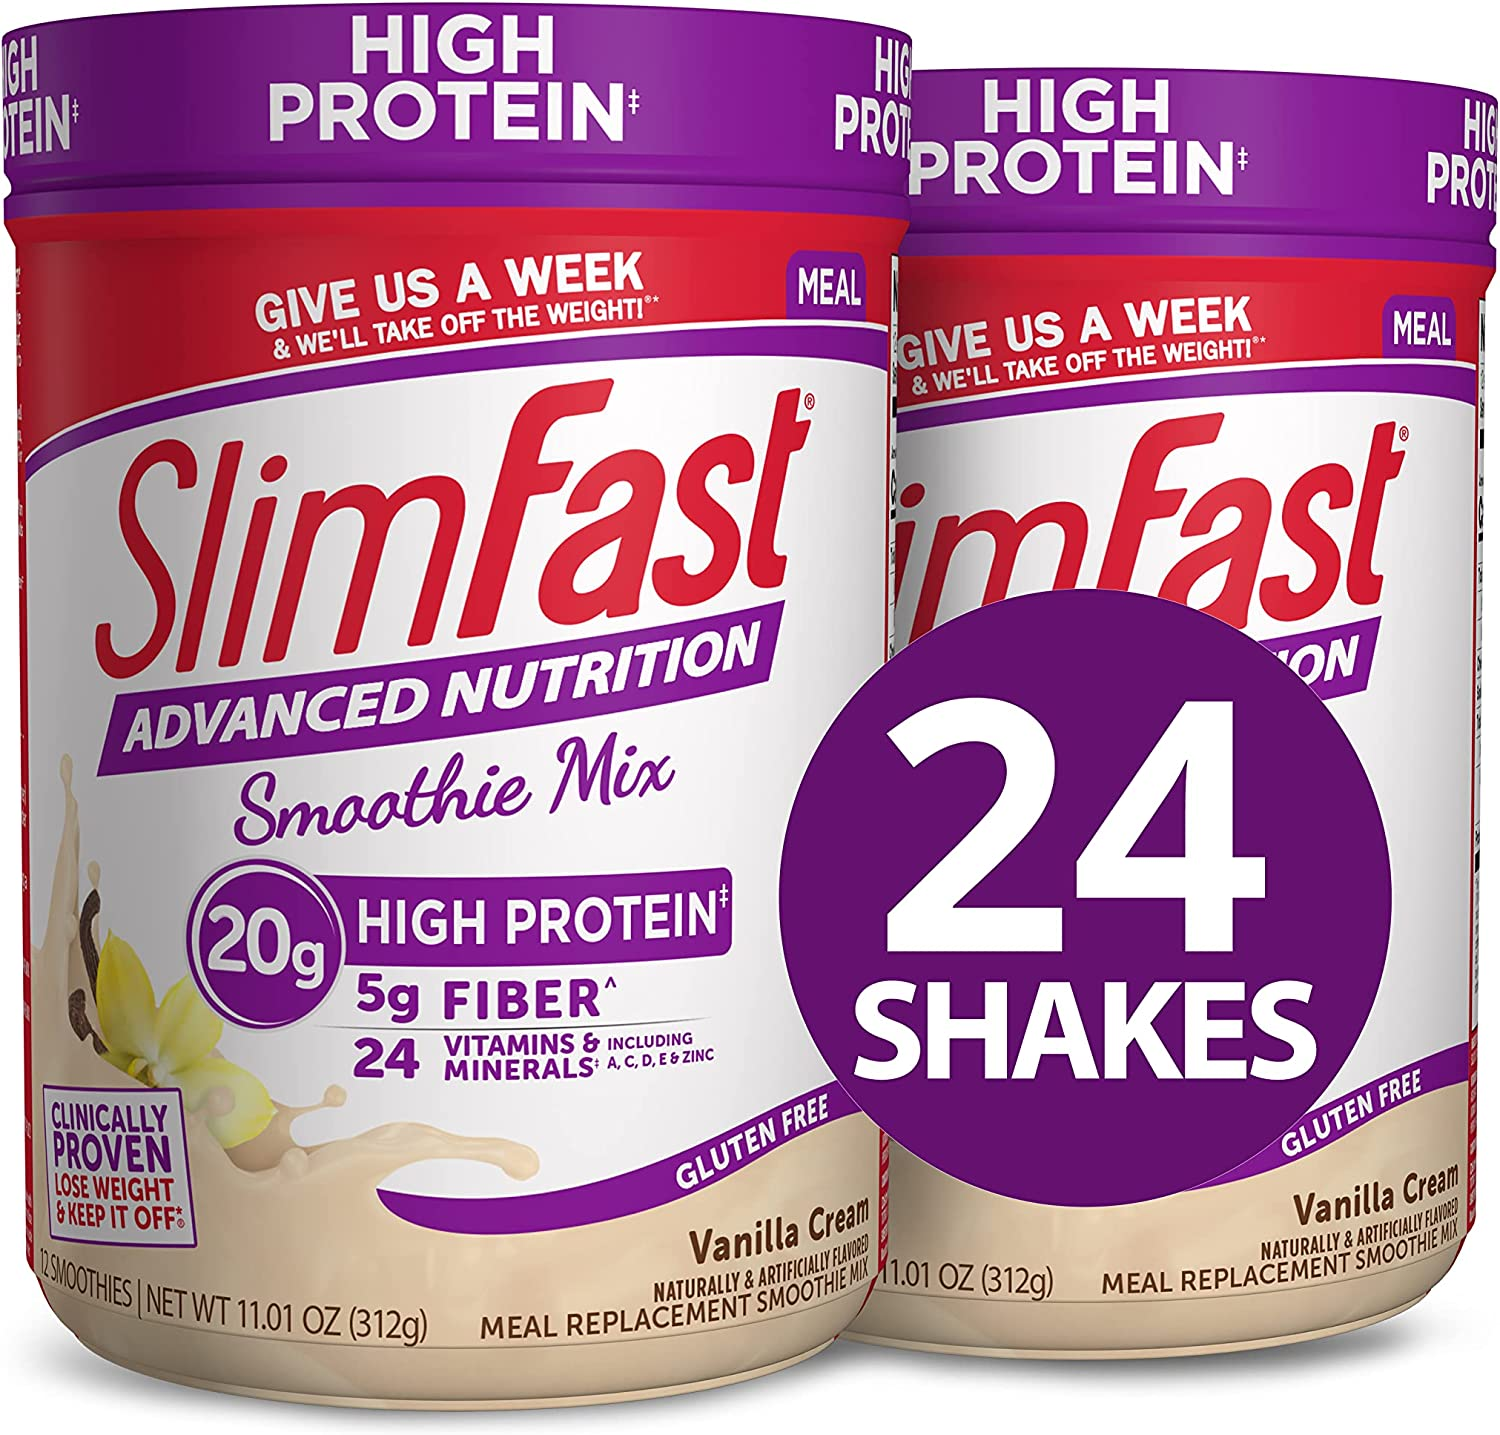 Slimfast Advanced Nutrition High Protein Meal Replacement Shake, Vanilla Cream, 20G of Ready to Drink Protein, 11 Fl. Oz Bottle, 4 Count (Pack of 3)